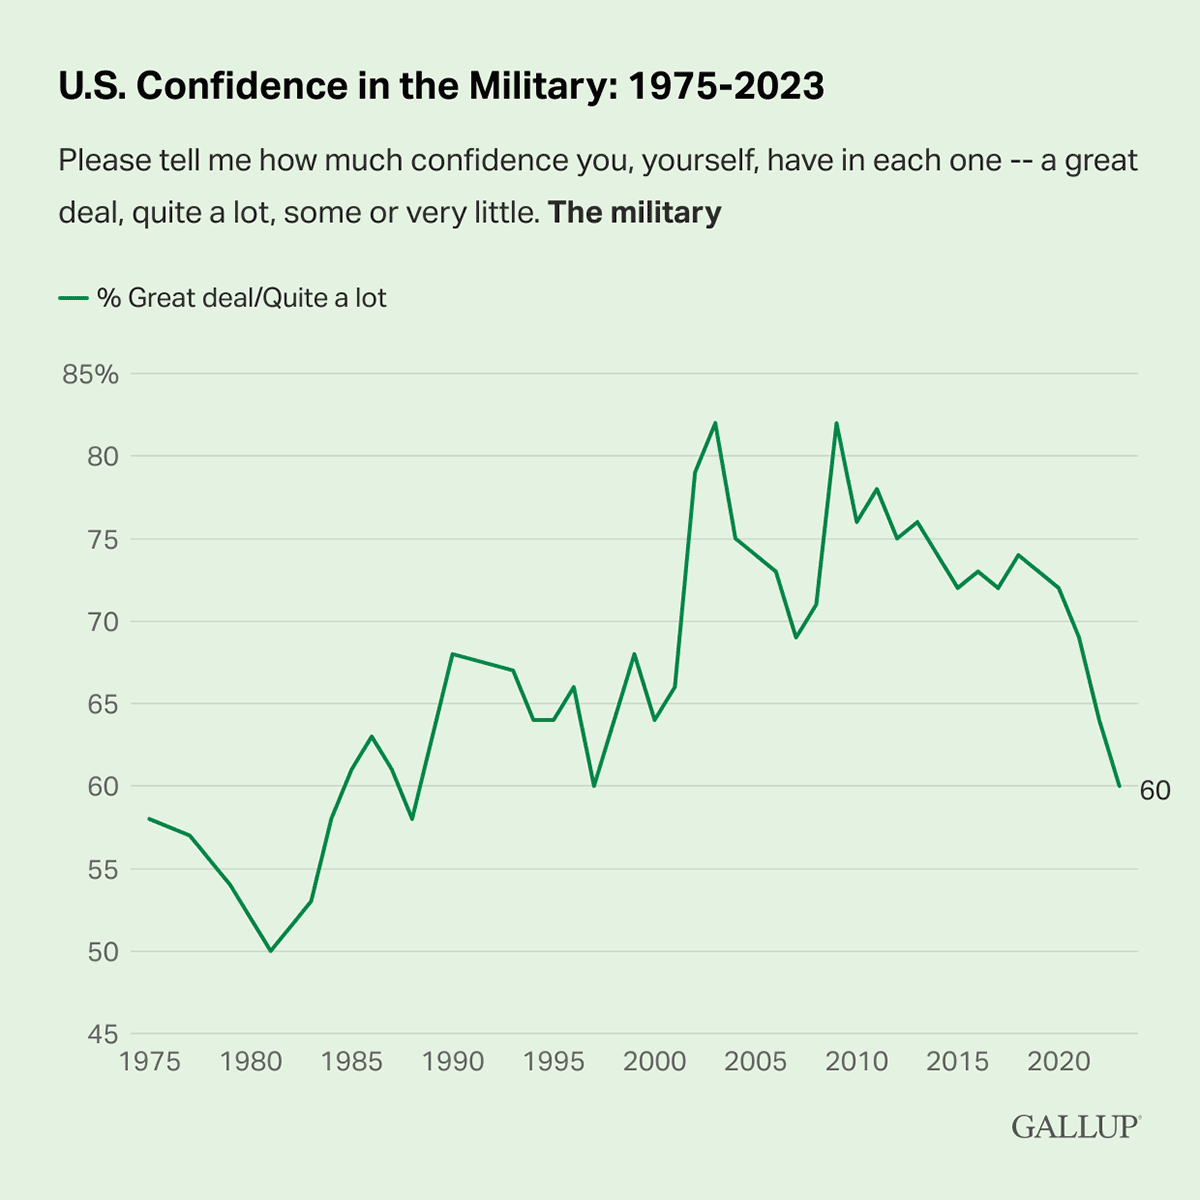 Line Chart: 60% of U.S. adults have confidence in the U.S. military in 2023.